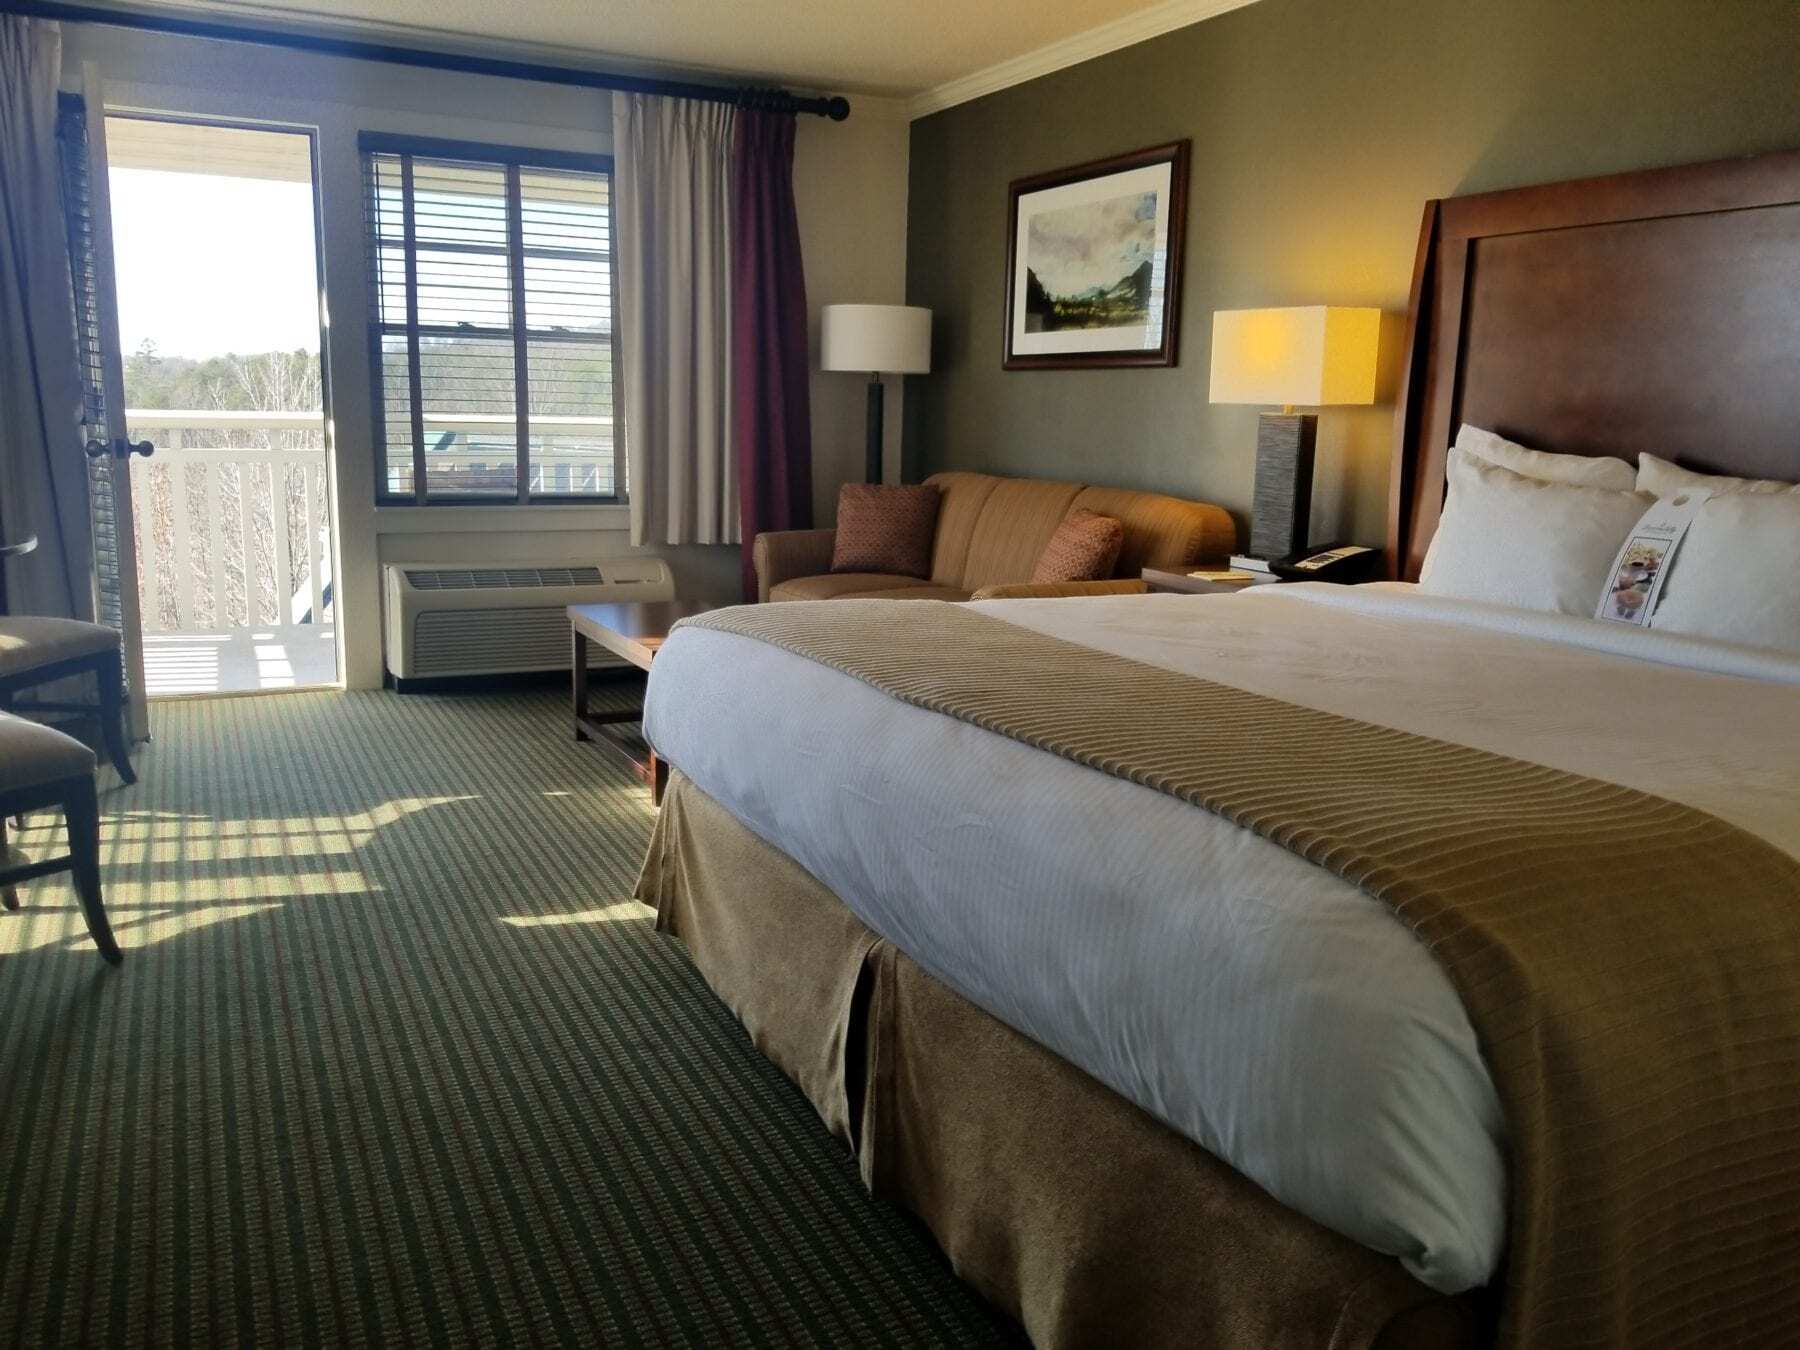 "Spacious hotel room at Brasstown Valley Resort in Young Harris, Georgia, with a comfortable king size bed positioned to offer a stunning view of the Blue Ridge Mountains from the private patio."